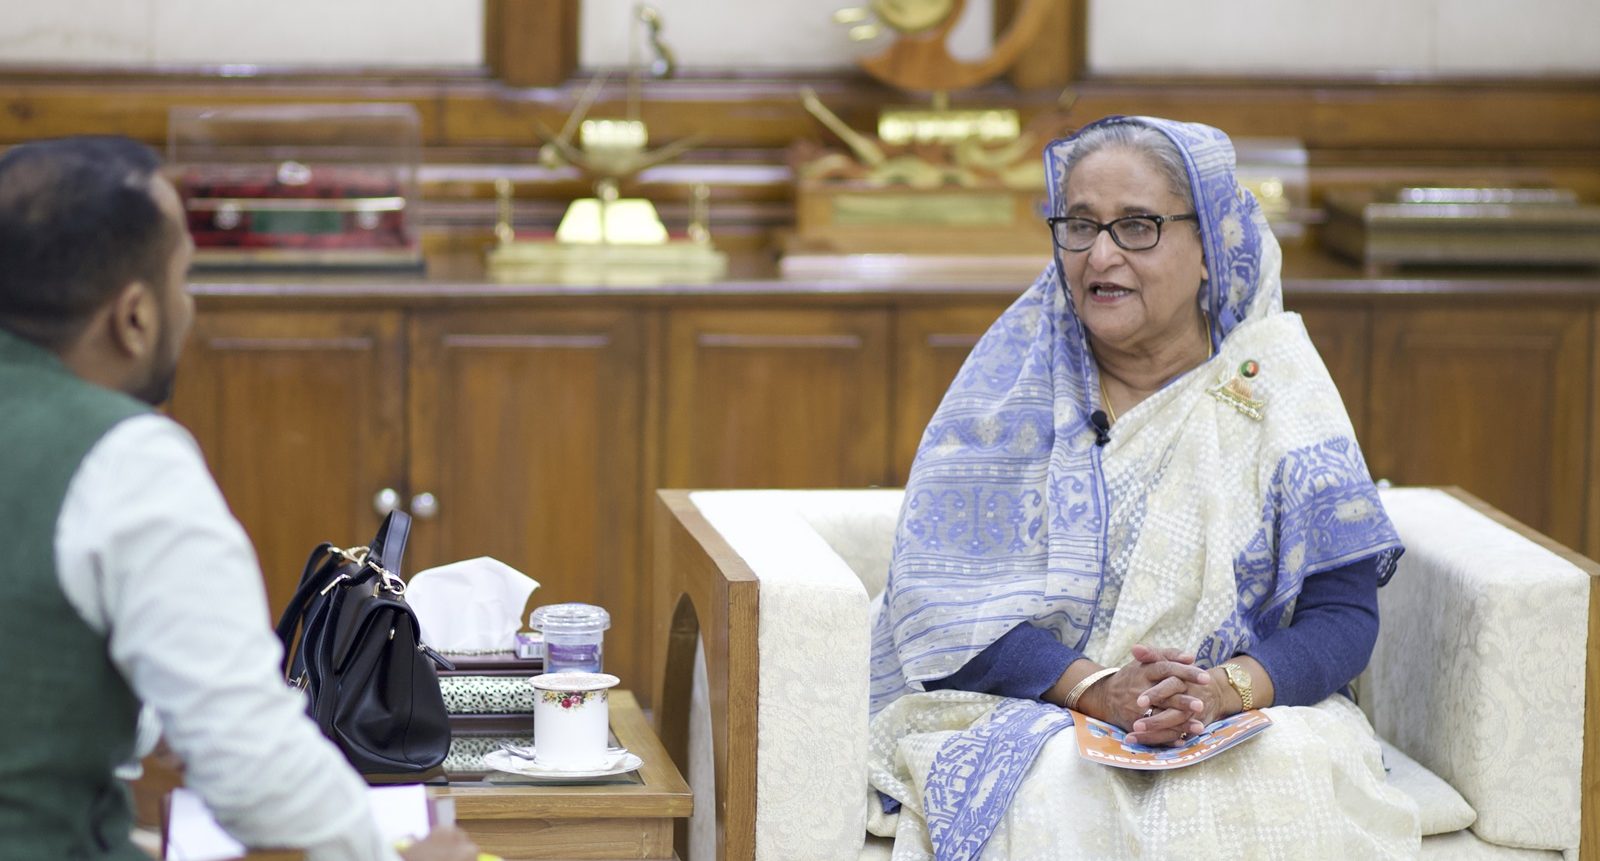 Bangladesh’s progress is not a miracle, it’s the result of strategic policymaking